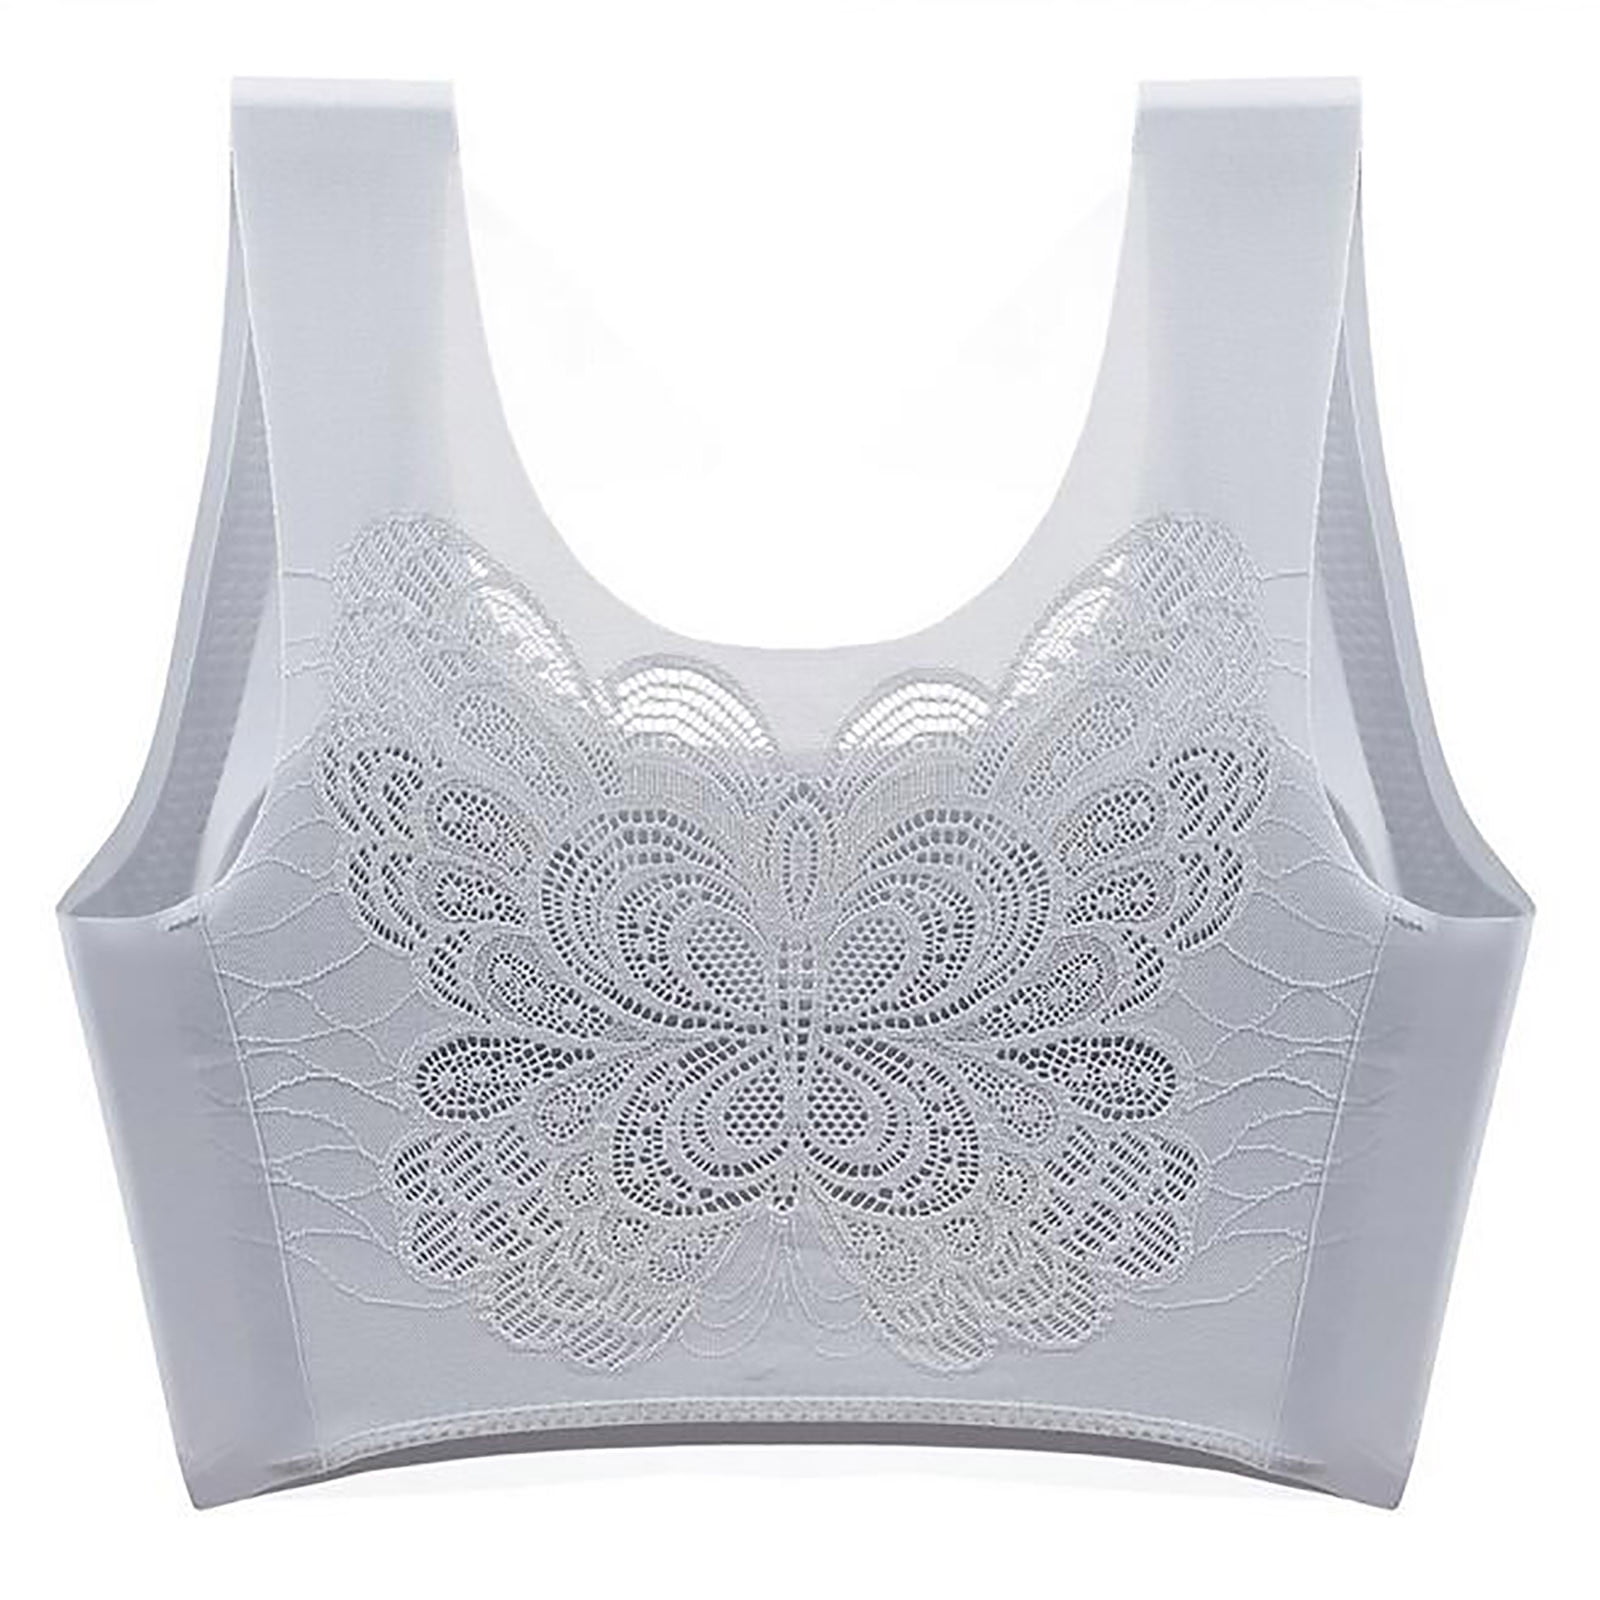  Lfzhjzc High Impact Sports Bras for Women, Shockproof Sports  Bras for Women Plus Size, for Running, Gym, Sports, Fitness (Color : White,  Size : 5X-Large) : Clothing, Shoes & Jewelry